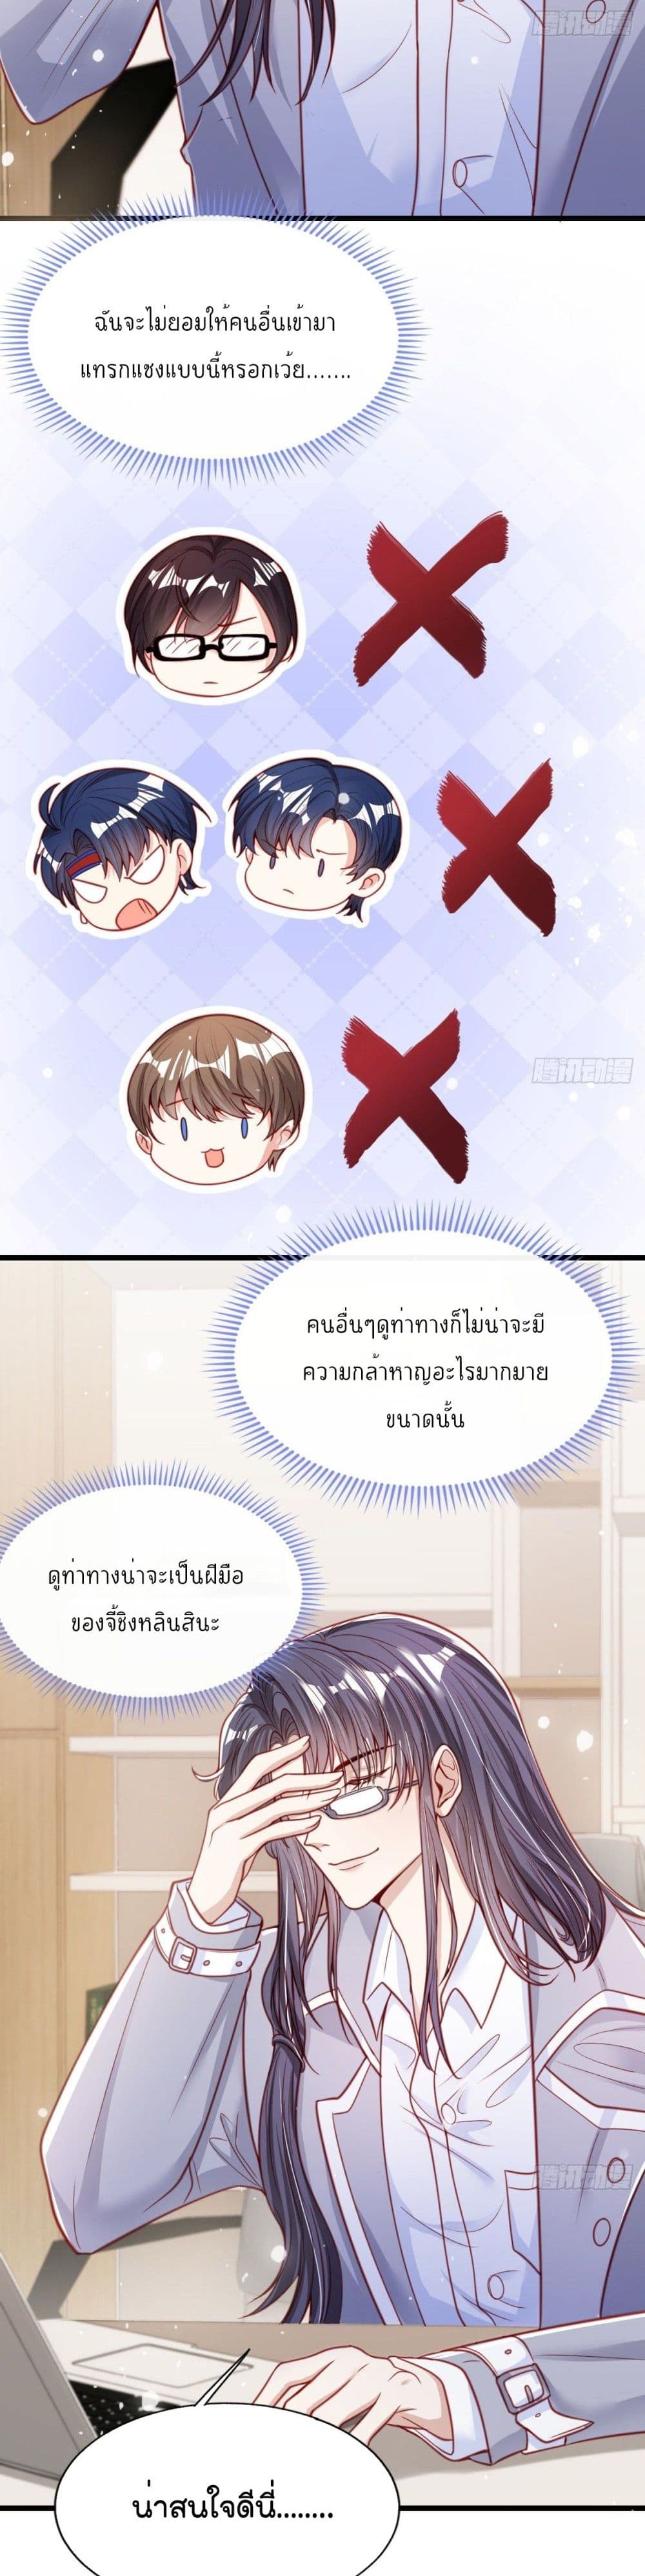 Find Me In Your Meory ตอนที่ 19 (12)